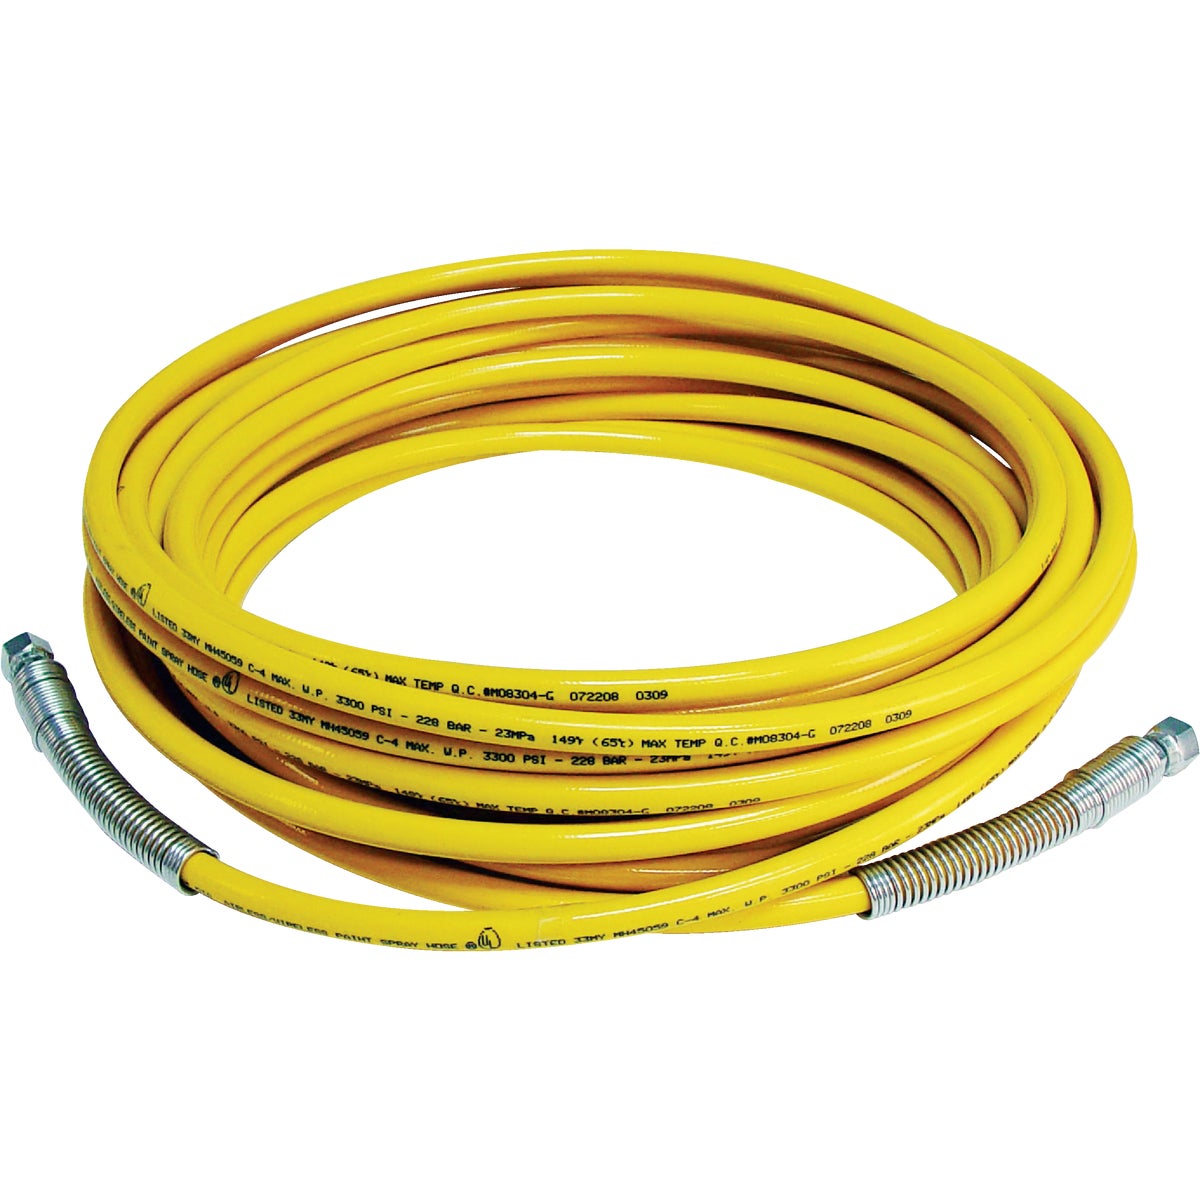 Wagner 25 Ft. 1/4 In. ID 3300 psi High Press Hose